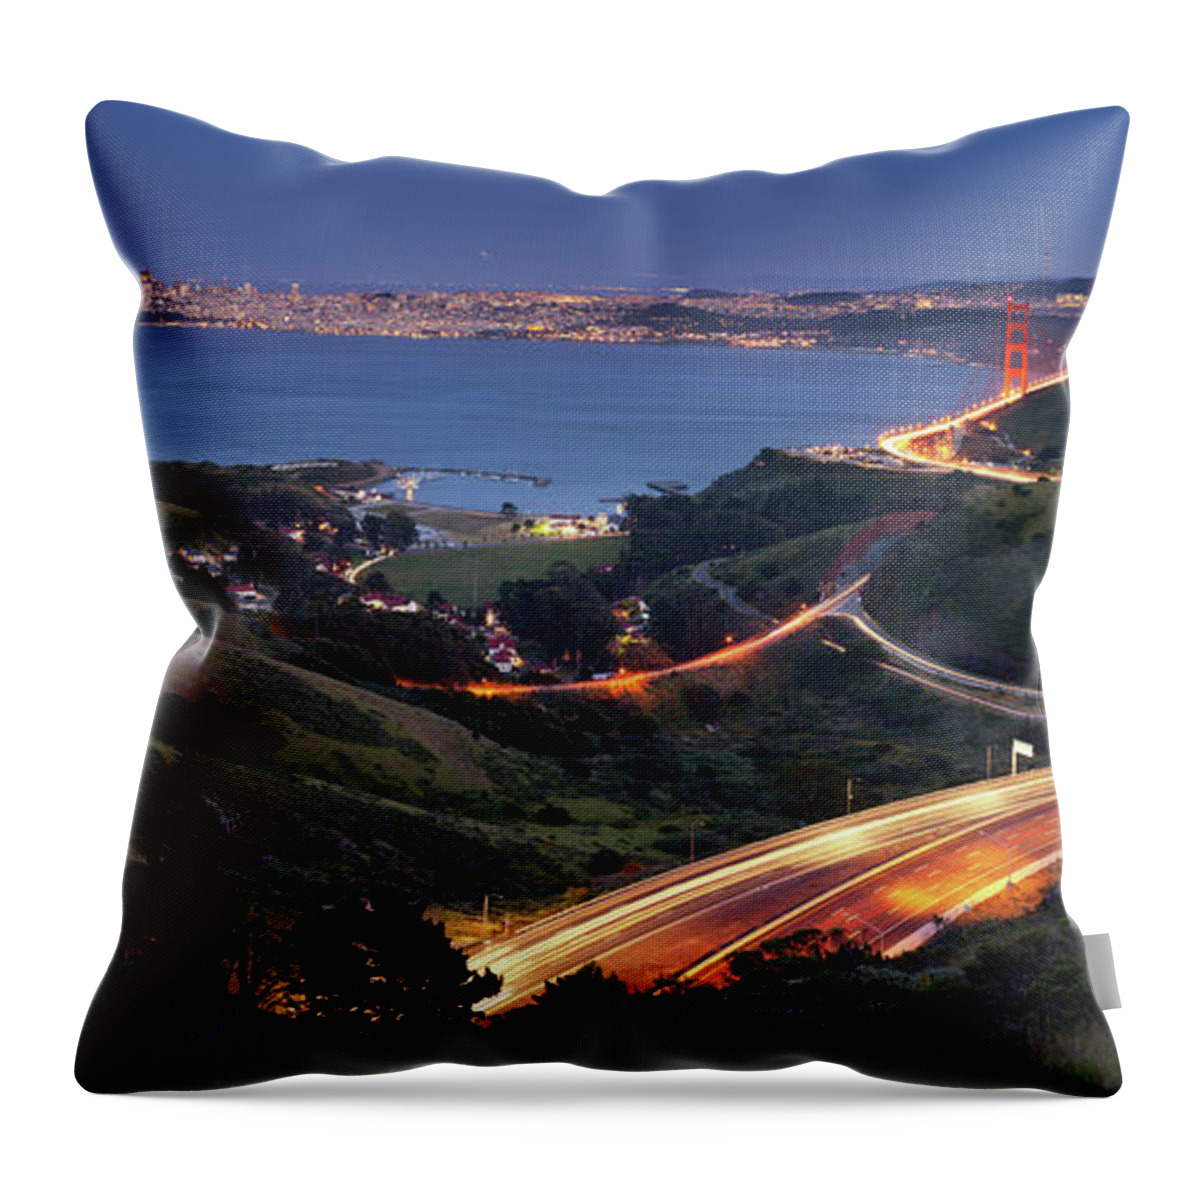 Scenics Throw Pillow featuring the photograph S Marks The Spot by Vicki Mar Photography